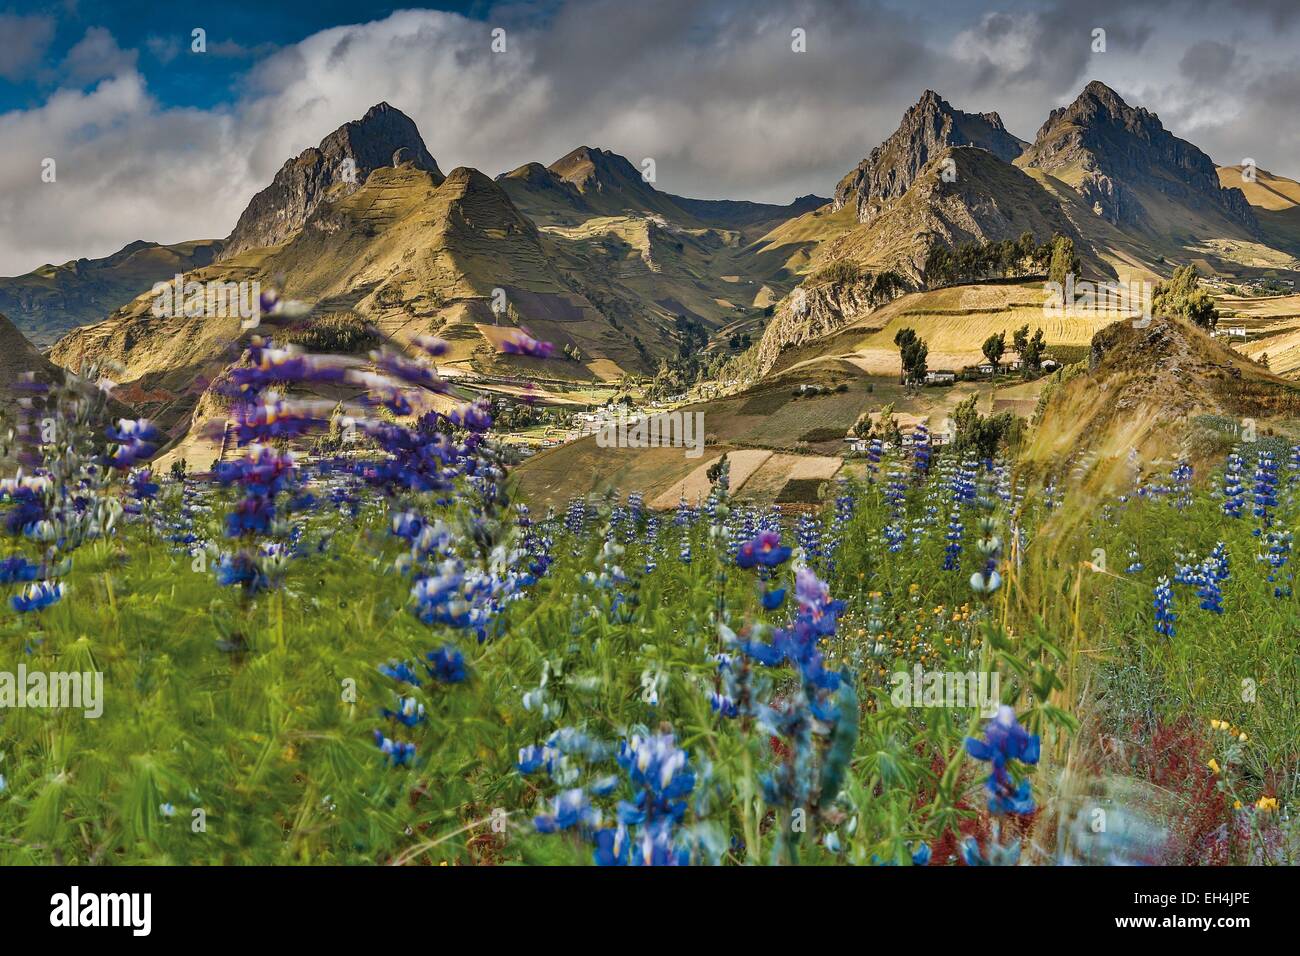 Ecuador, Cotopaxi, Zumbahua, mountainous Andean landscape of plains and mountains under a cloudy sky at sunrise with wild lupins in the foreground Stock Photo